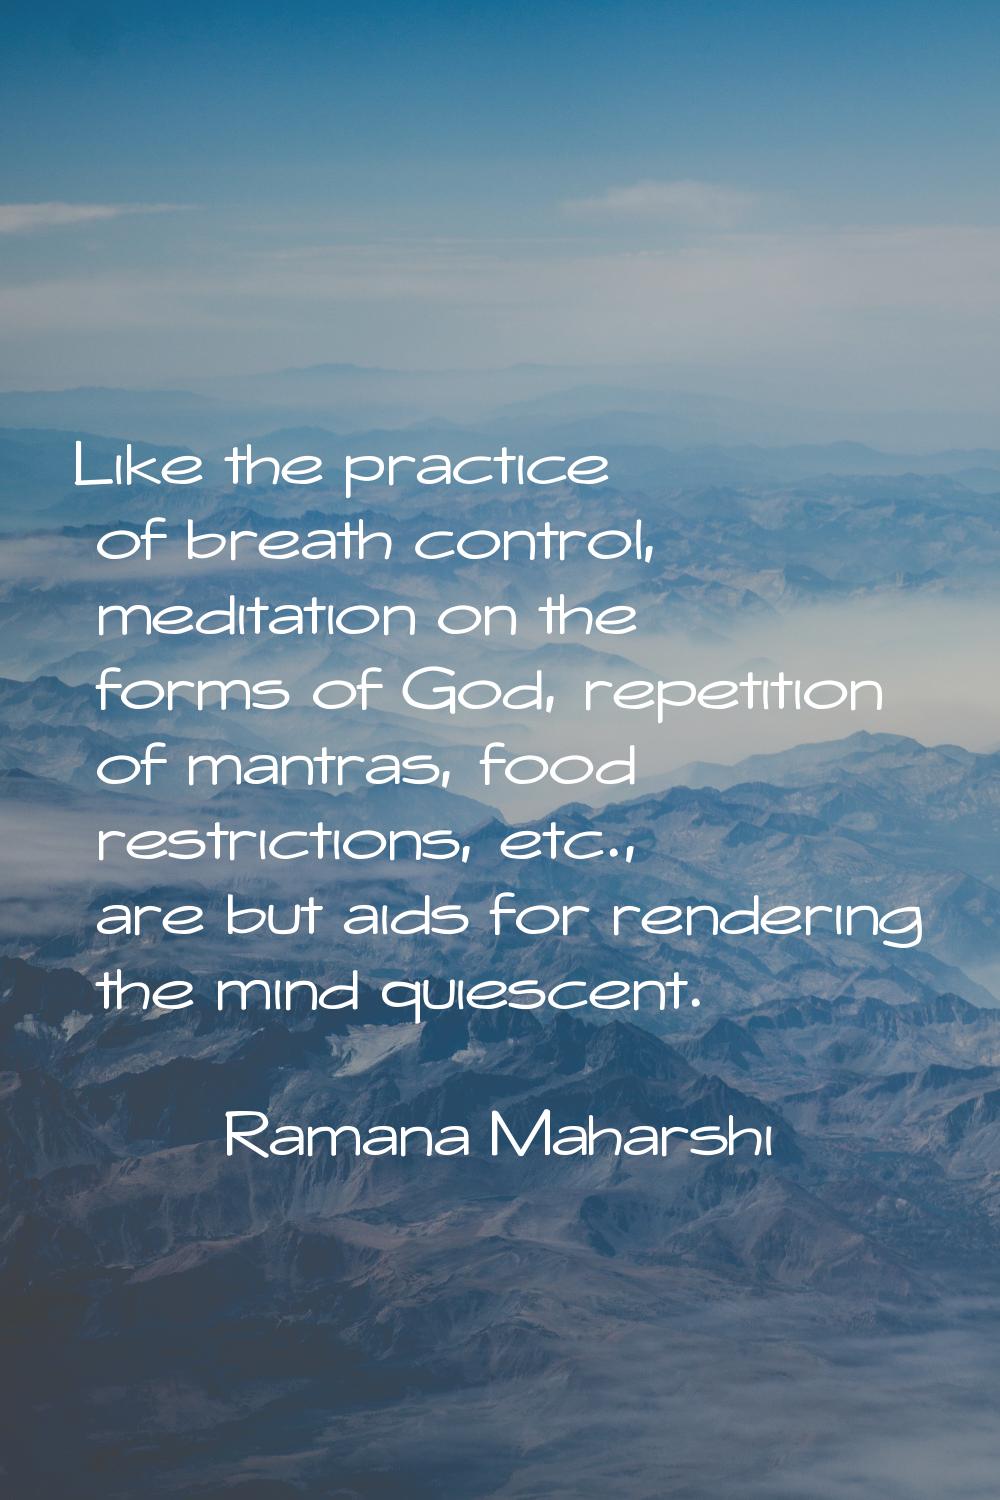 Like the practice of breath control, meditation on the forms of God, repetition of mantras, food re